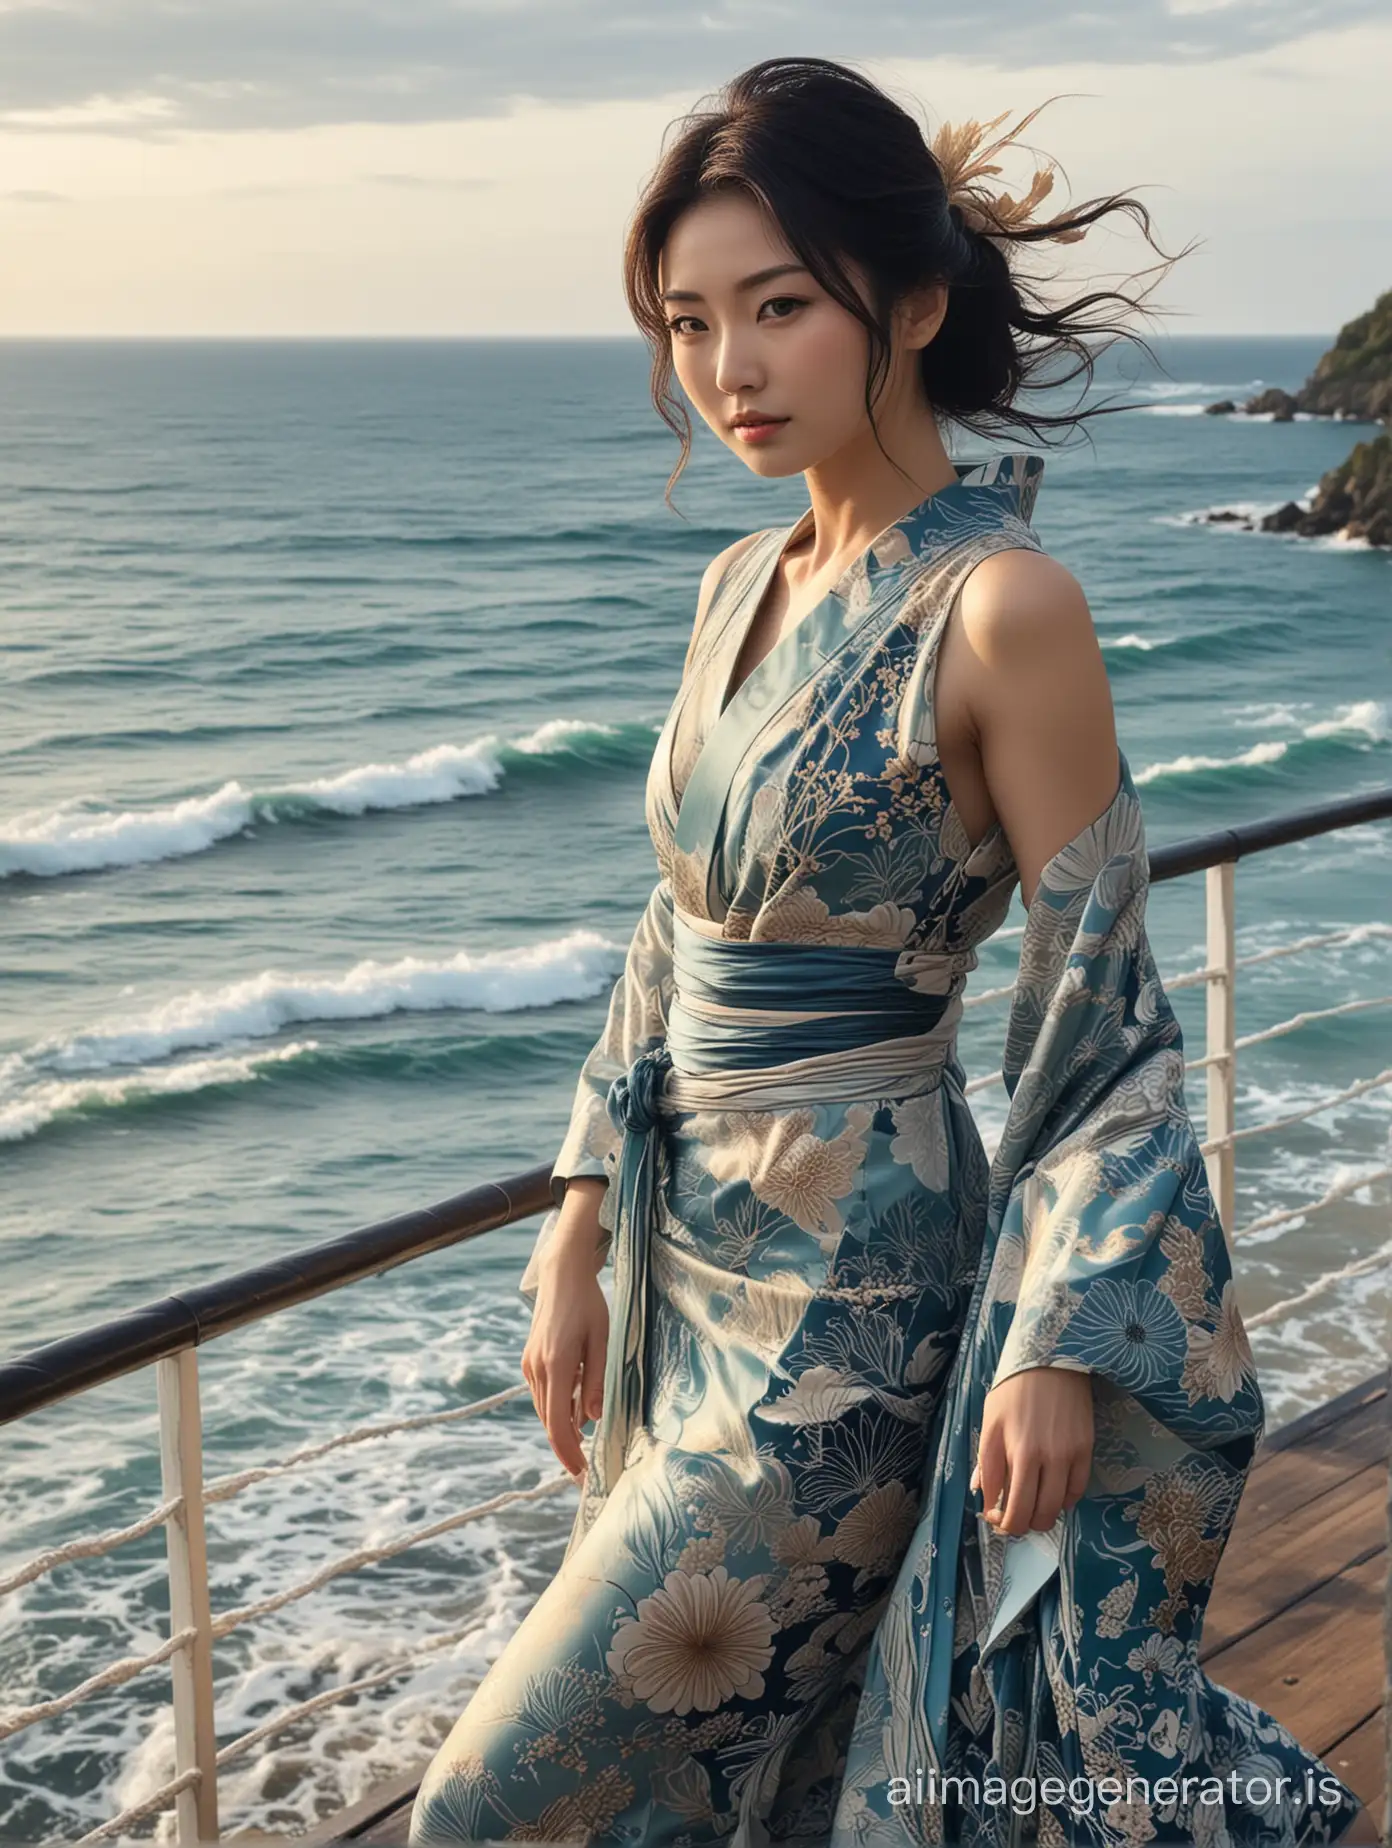 Glamorous-Japanese-Model-with-Perfect-Proportions-at-Oceanfront-CloseUp